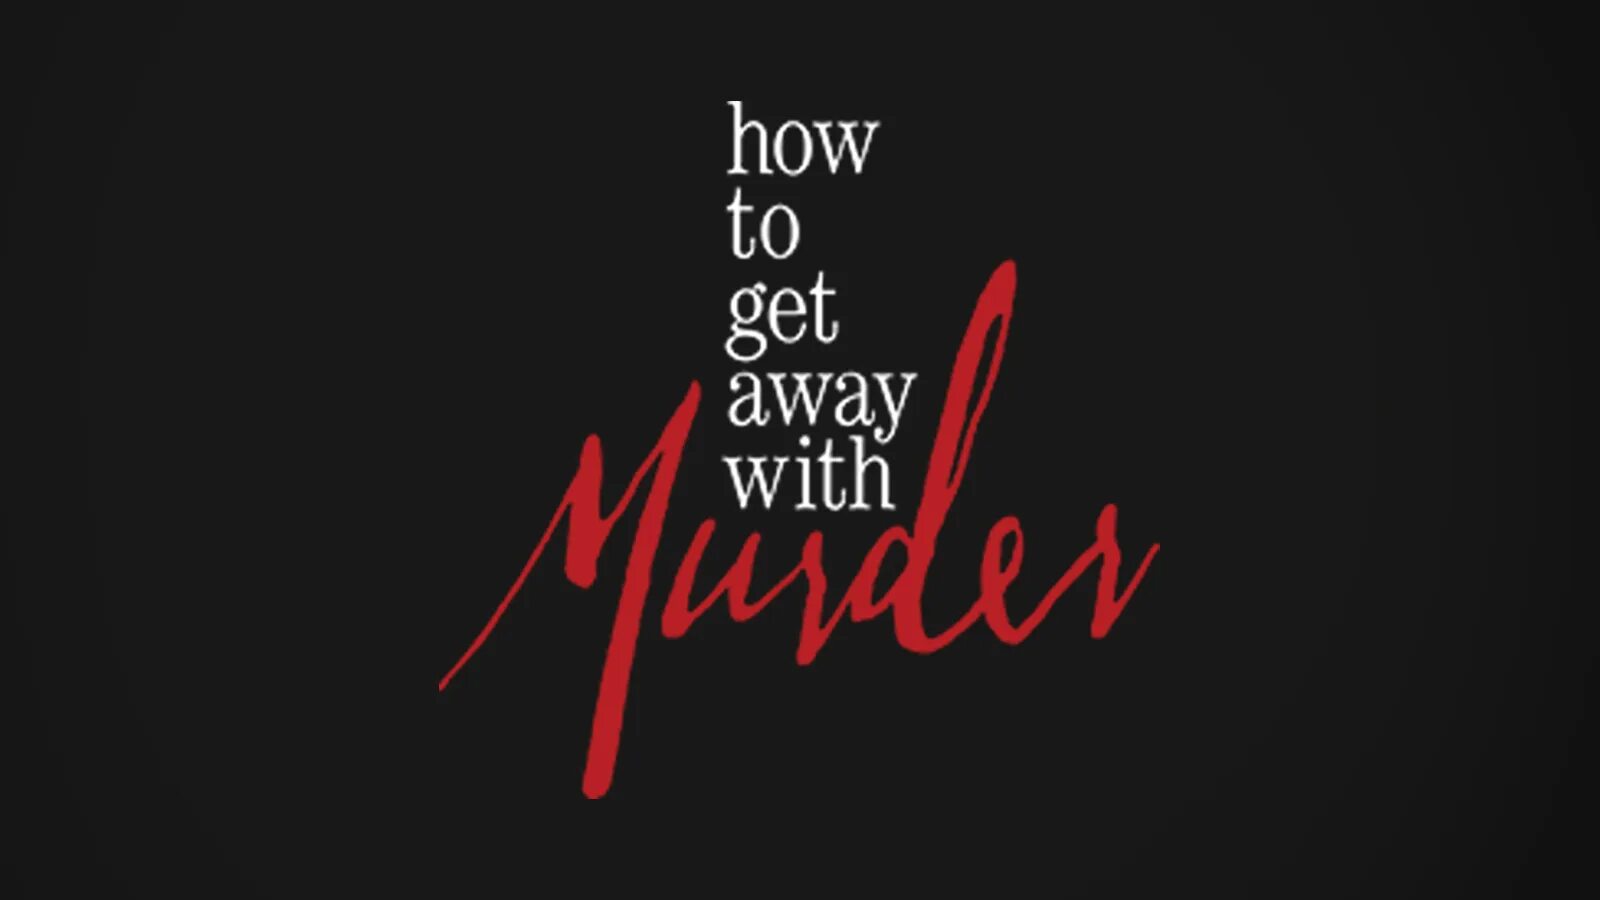 How to get away with Murder надпись. How to get away with Murder заставка. To get away. How to get away with Murder надпись на доске.